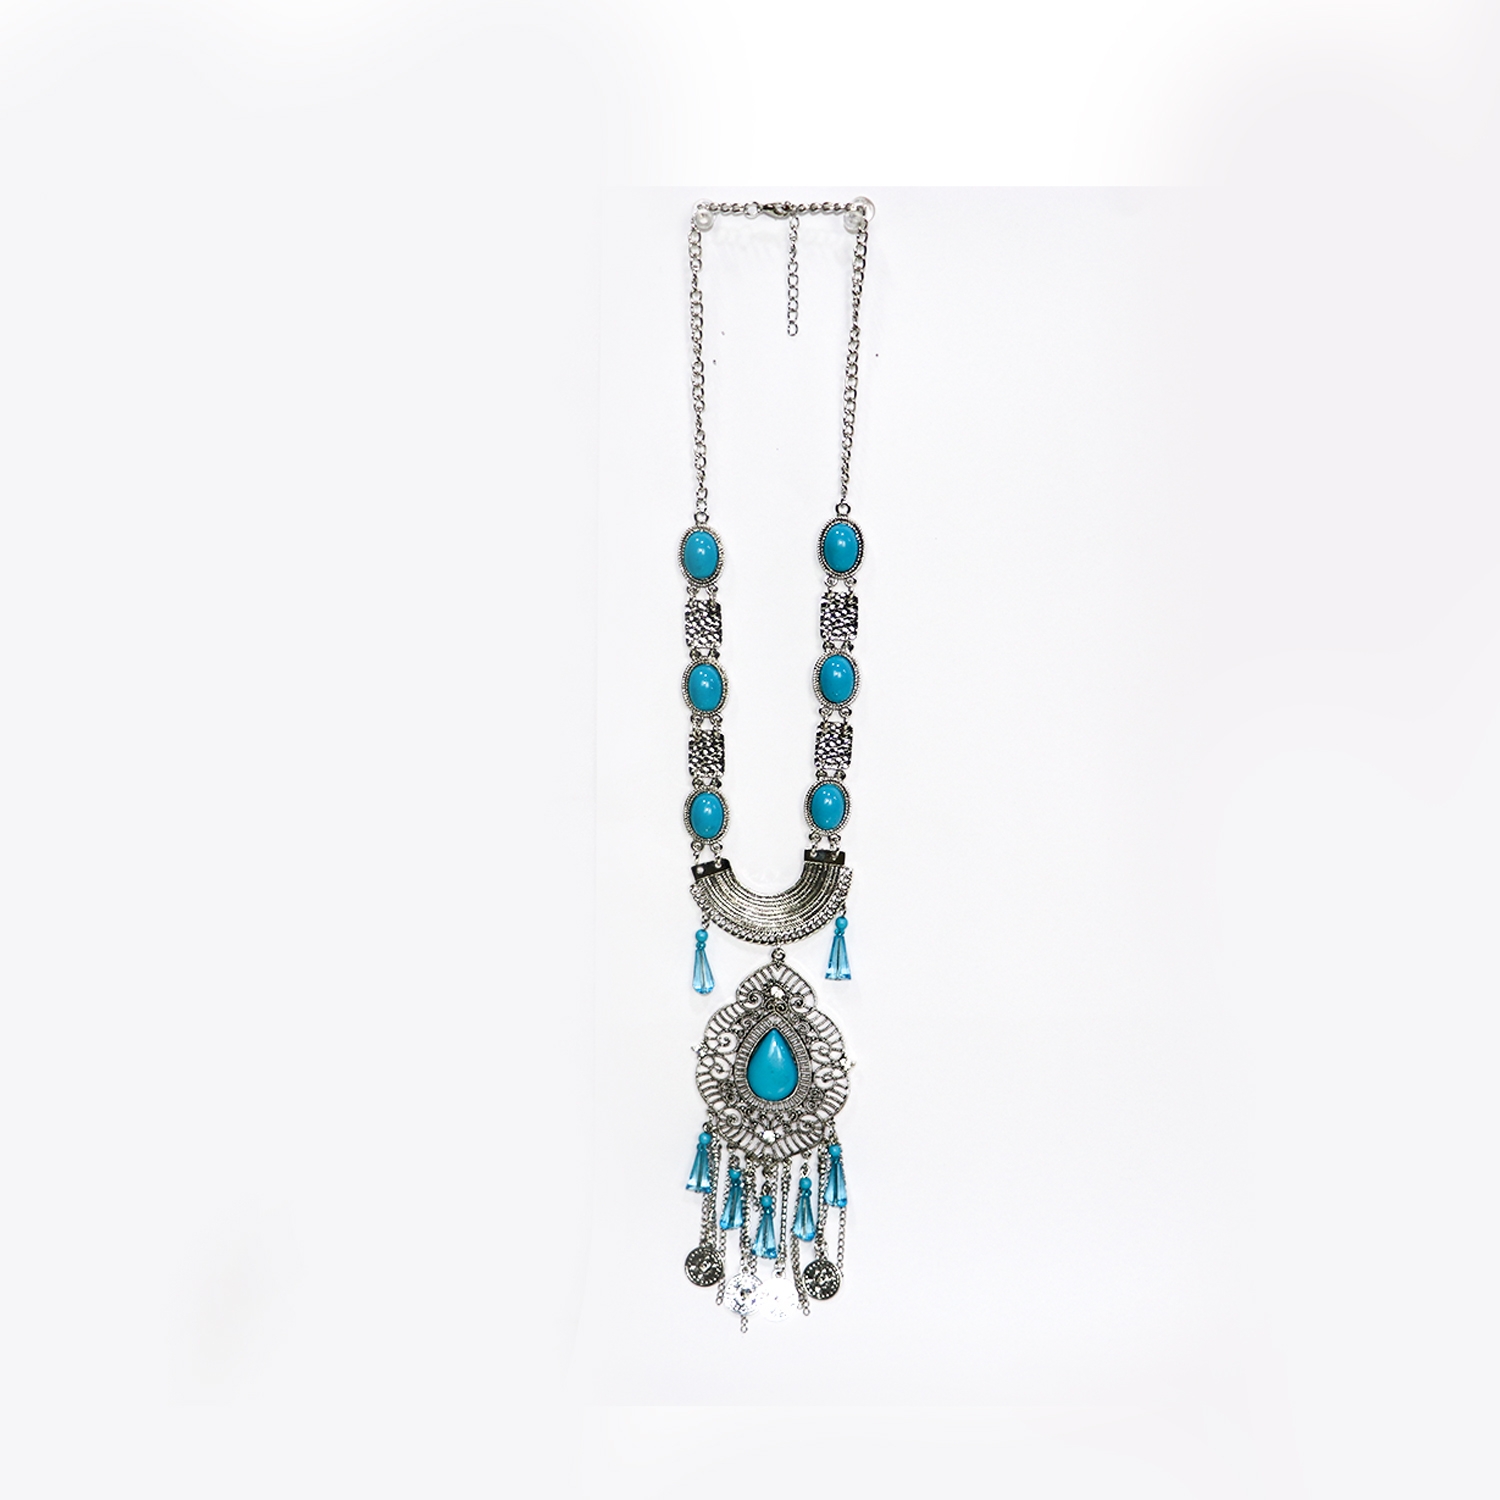 EMM | EMM's Blue Necklace For Women And Girls